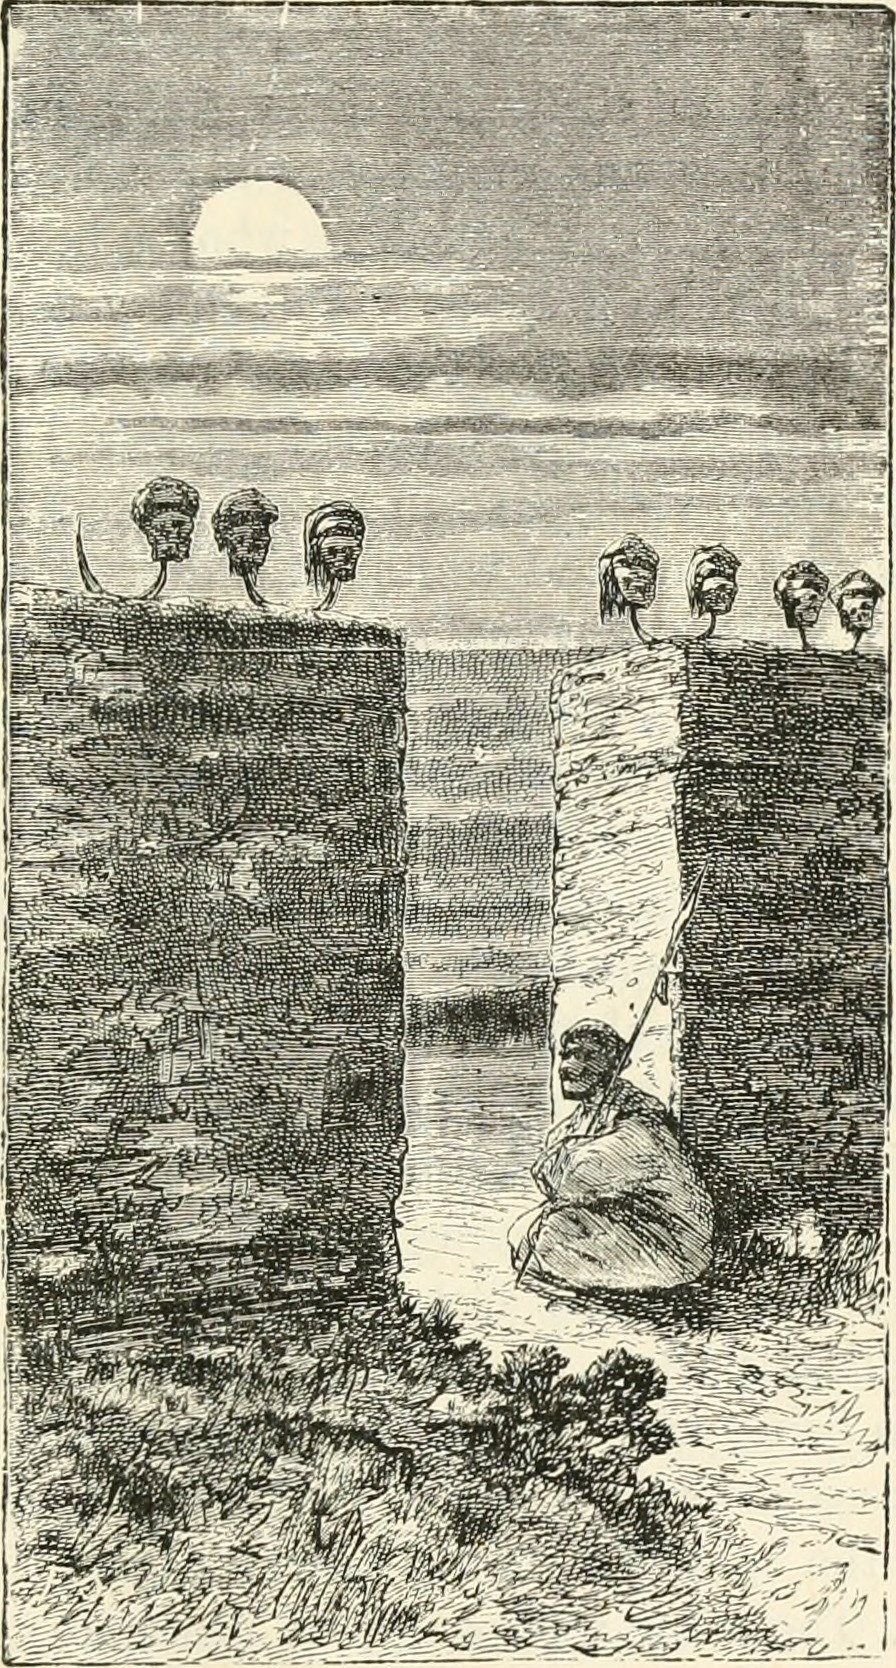 Image from page 184 of "Africa" (1884)